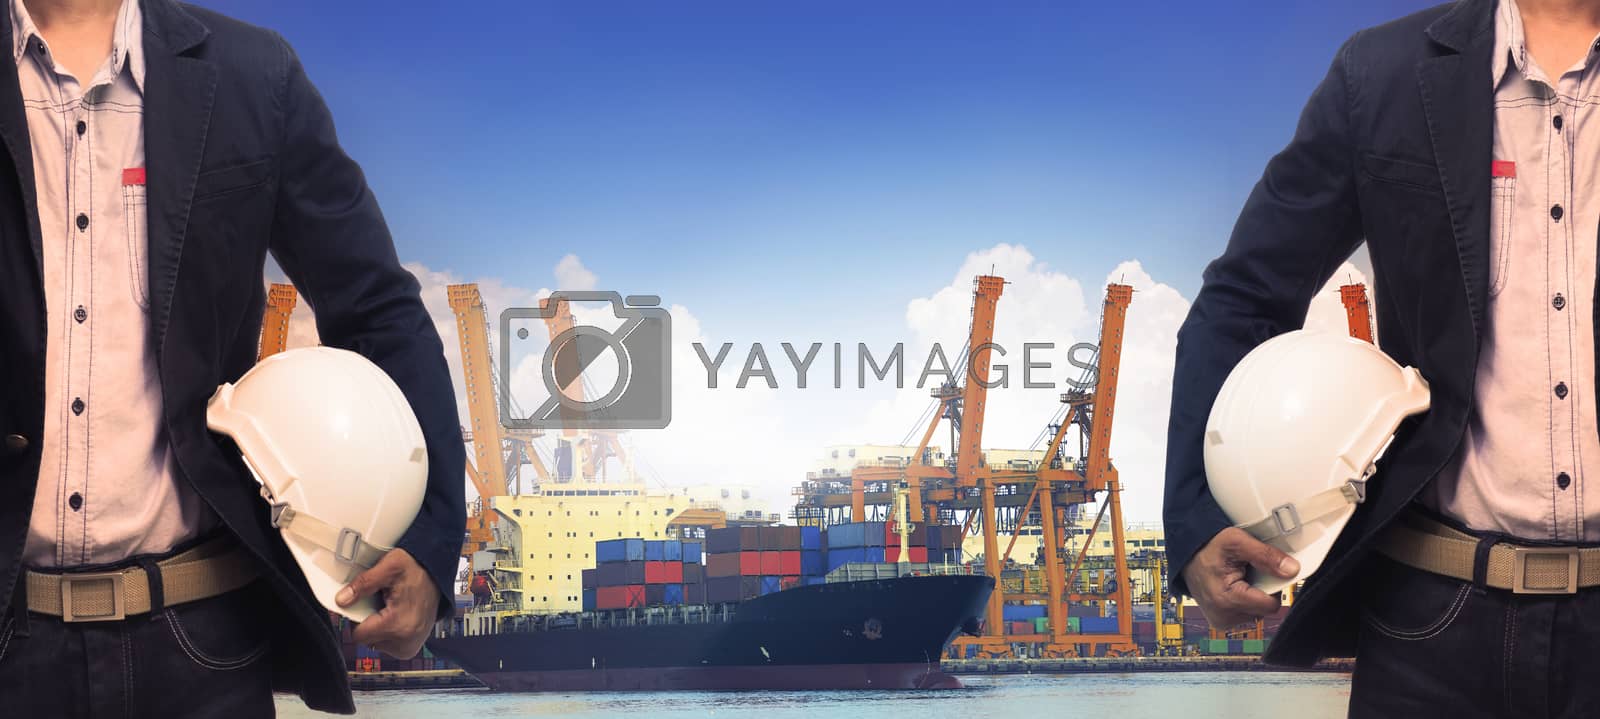 Royalty free image of working man in port authority use for shipping ,logistic,vessel, by khunaspix